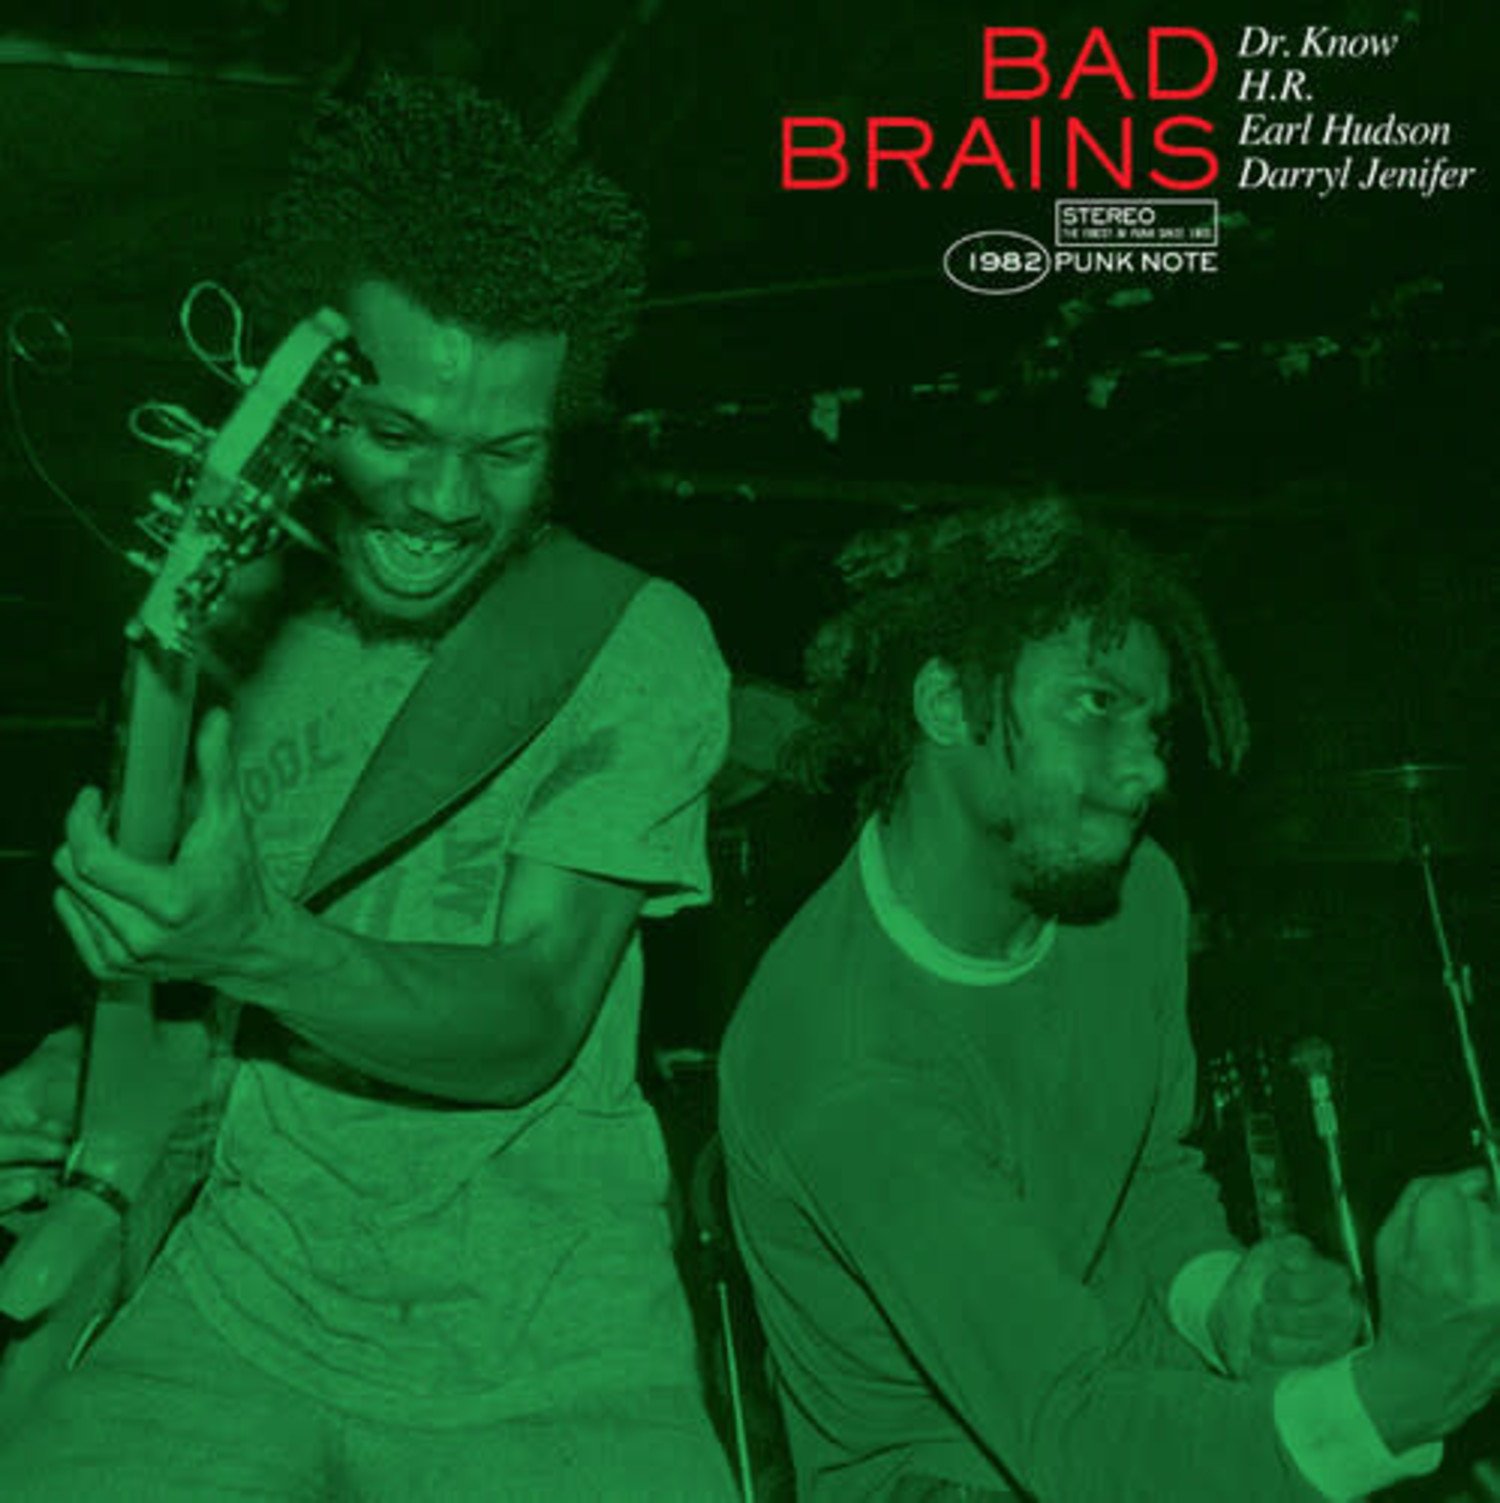 H.R. of Bad Brains 500-Piece Jigsaw Puzzle Experience - Punkzles